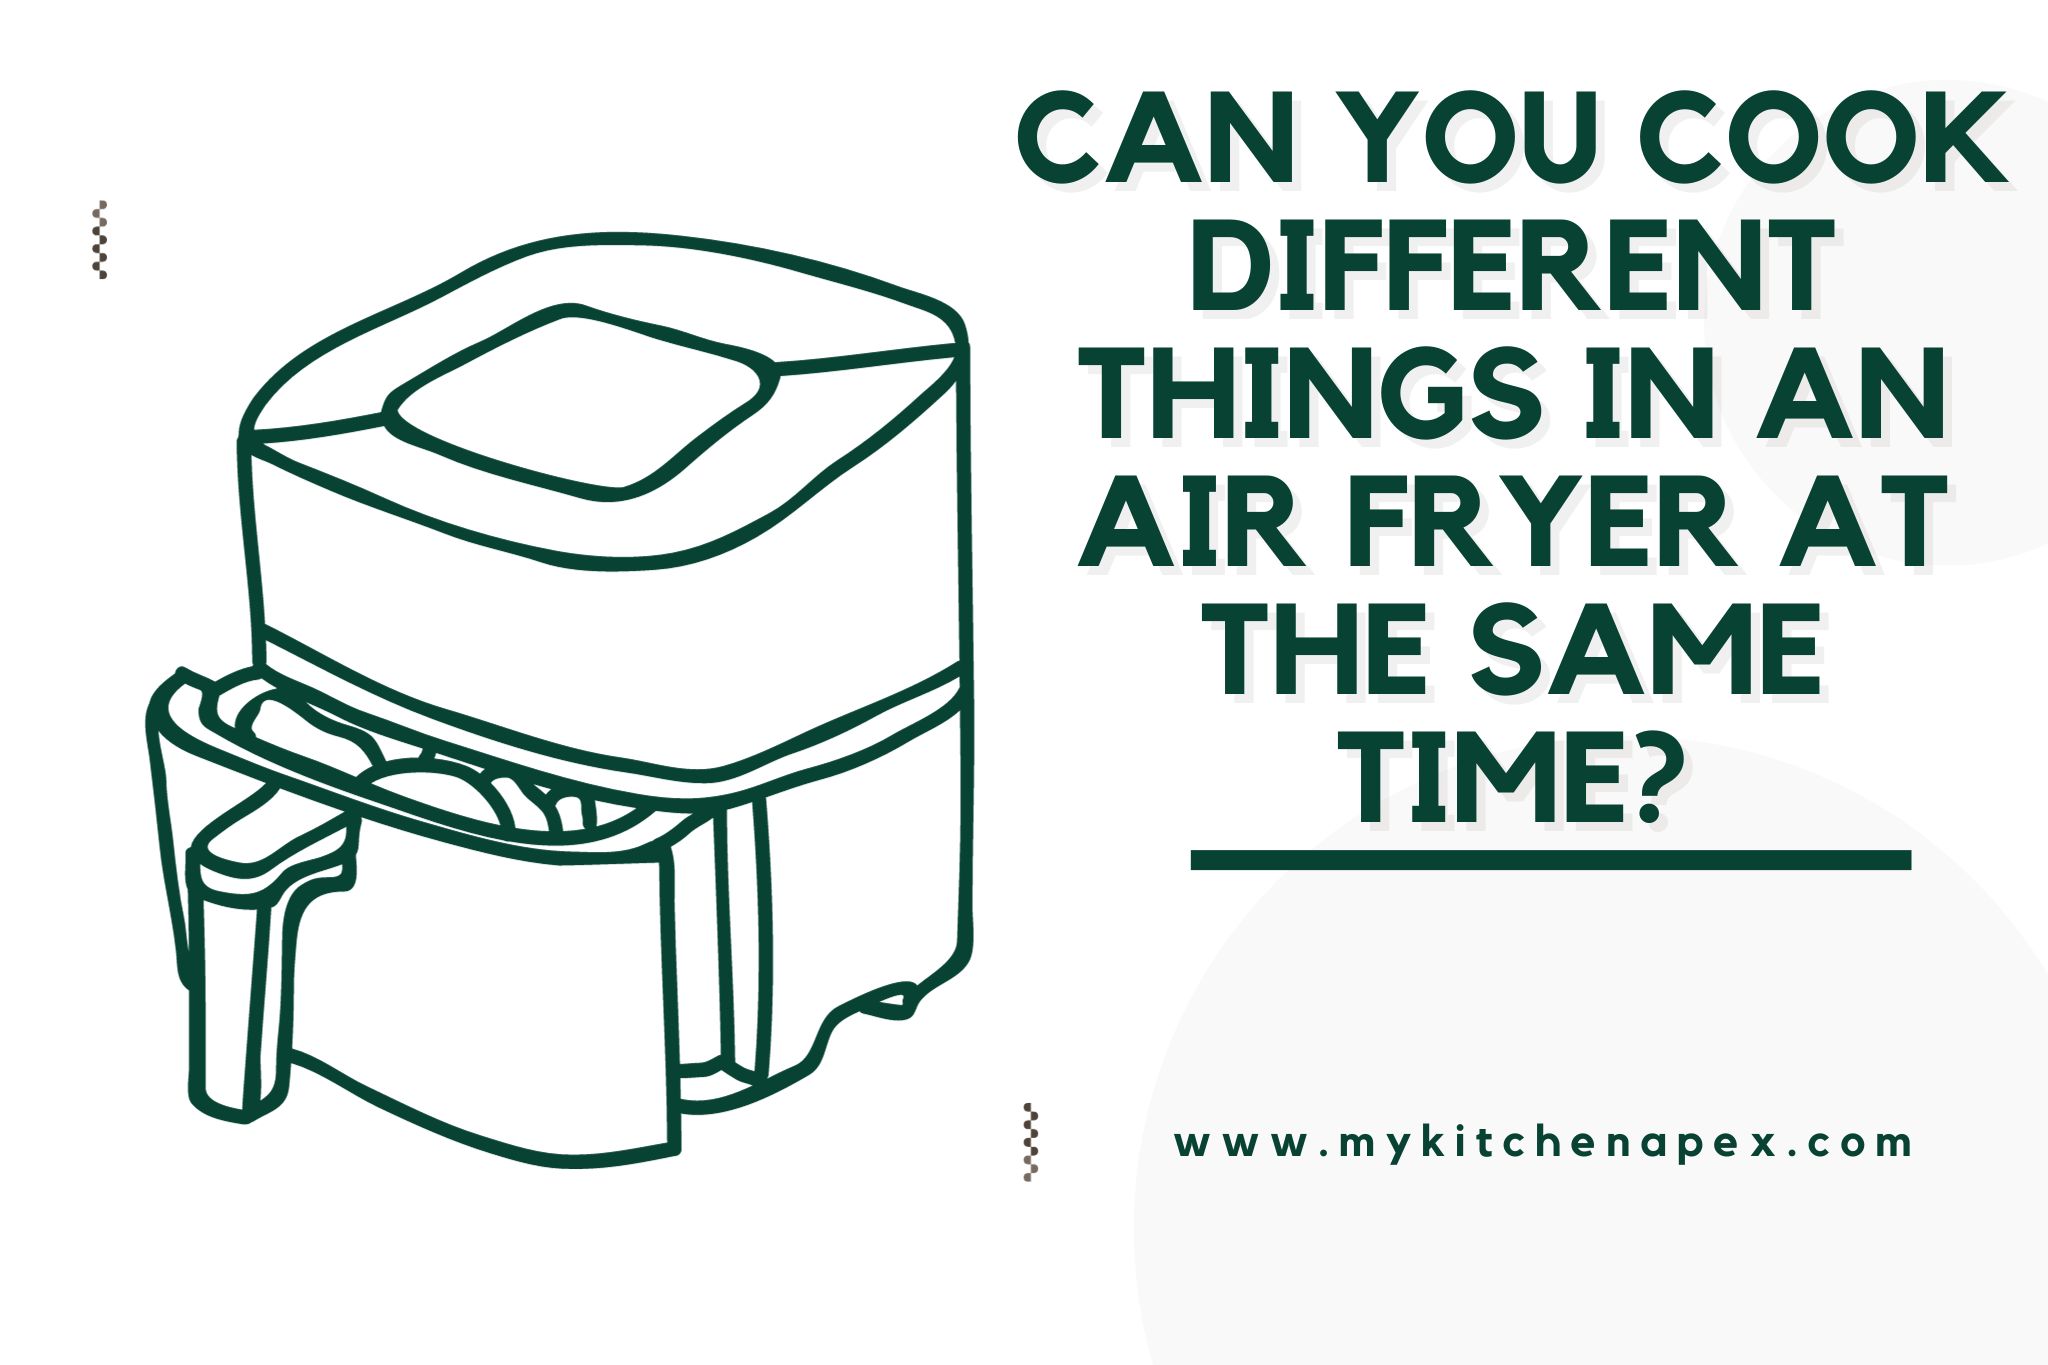 Can you cook different things in an air fryer at the same time?